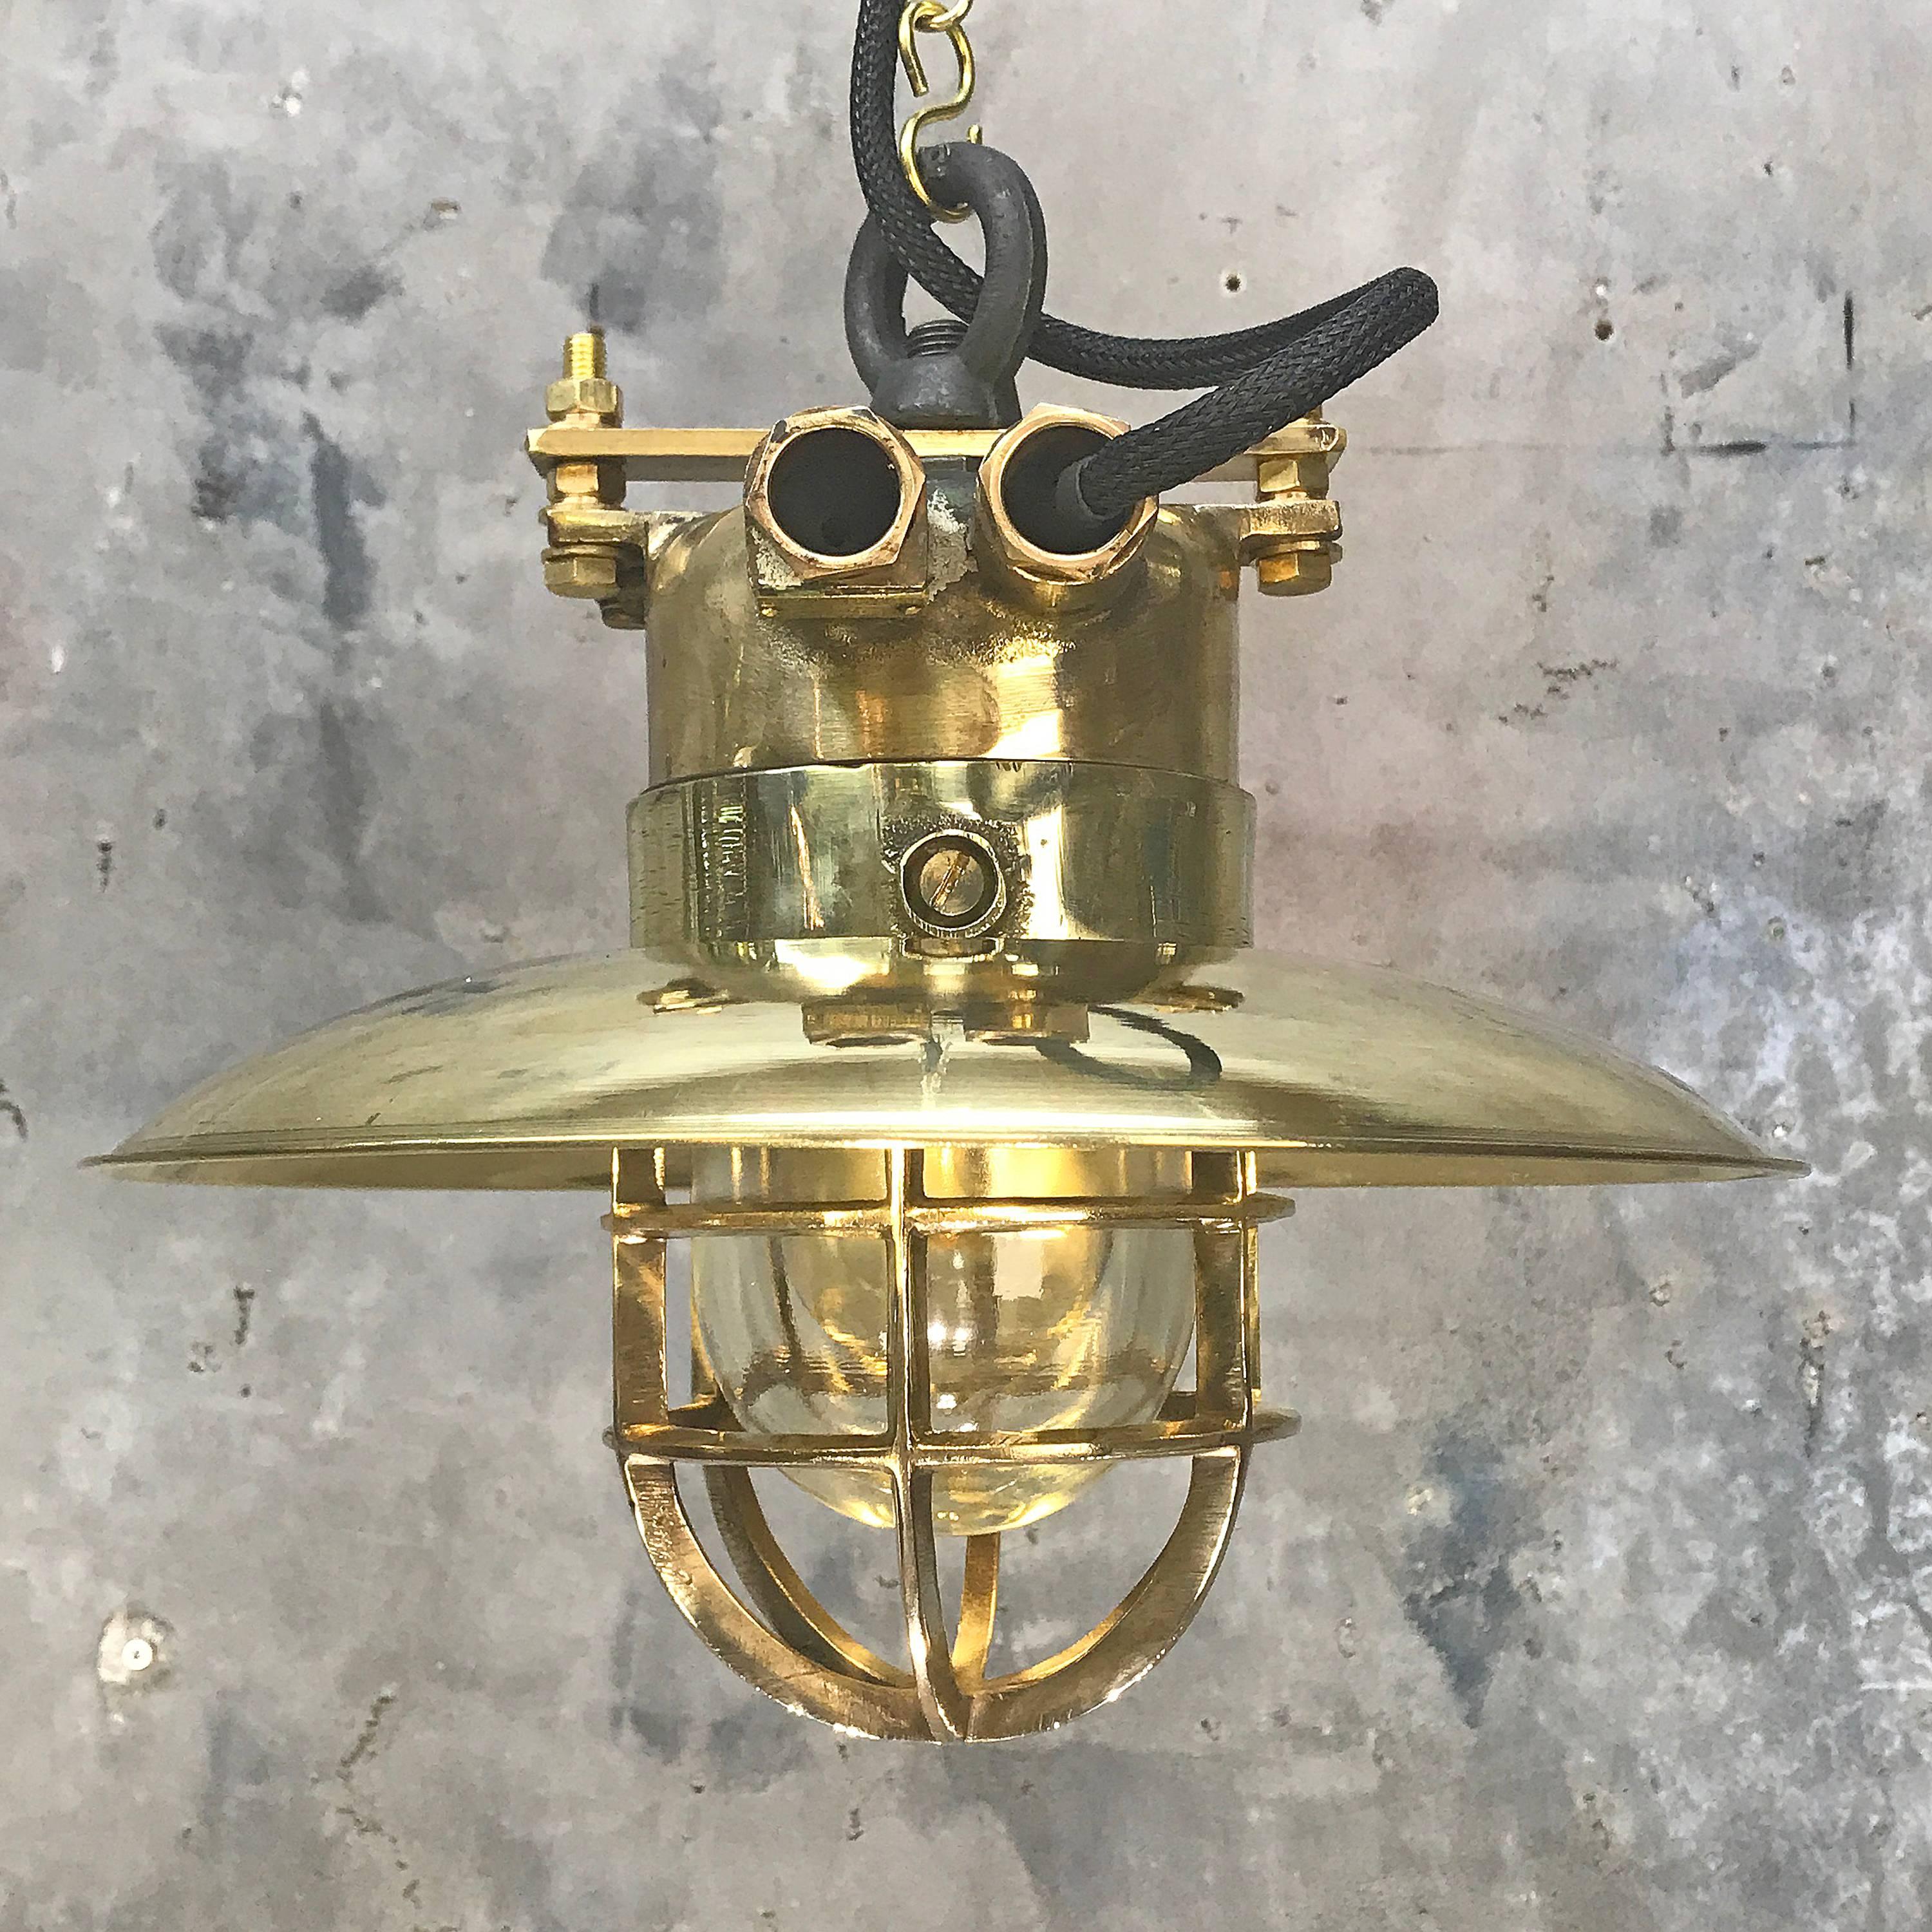 Solid cast bronze and brass explosion proof pendant with 30 cm copper shade E27.

This is an excellent example of an original explosion proof lamp which was salvaged from an old German ship. The date is circa 1975, it has the original ceramic and